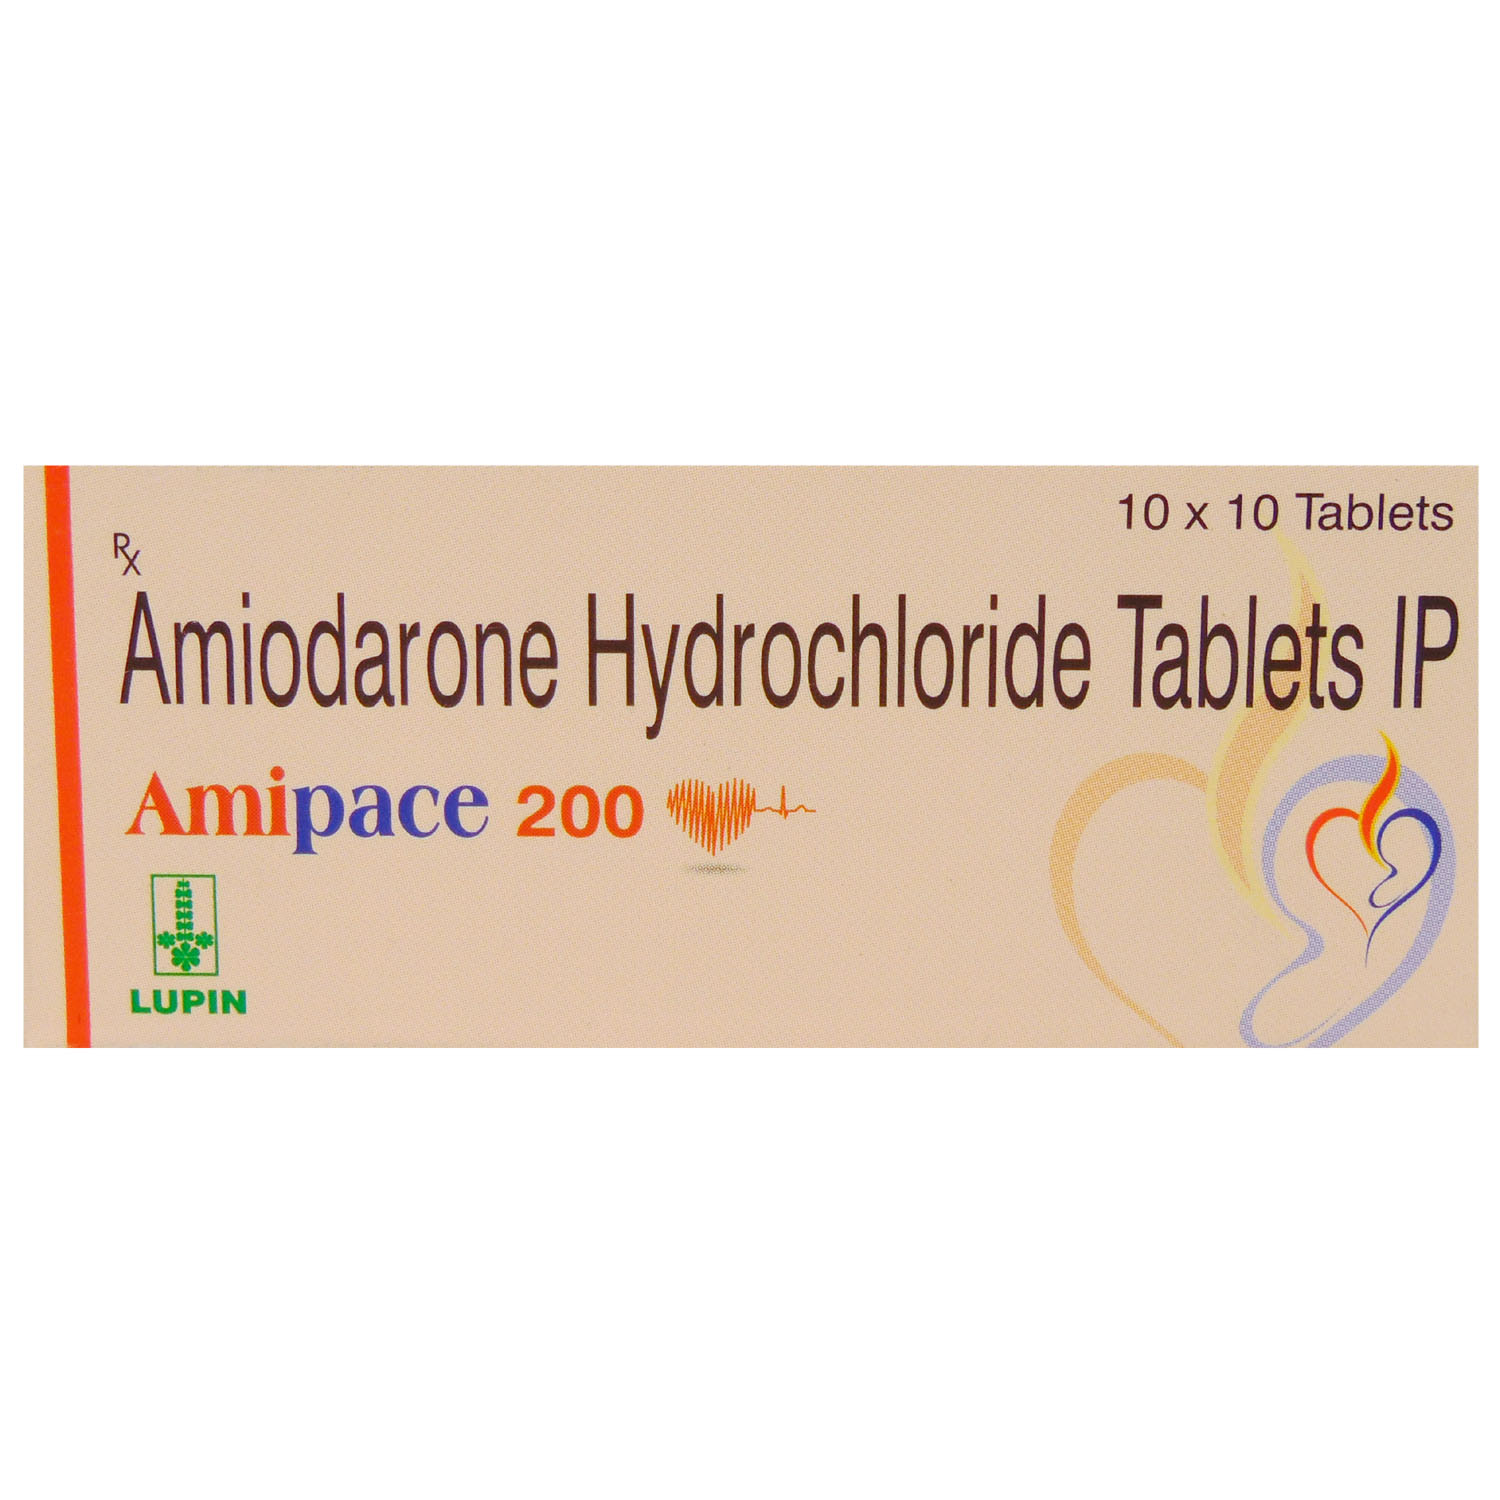 Amipace 200 Tablet 10's, Pack of 10 TabletS